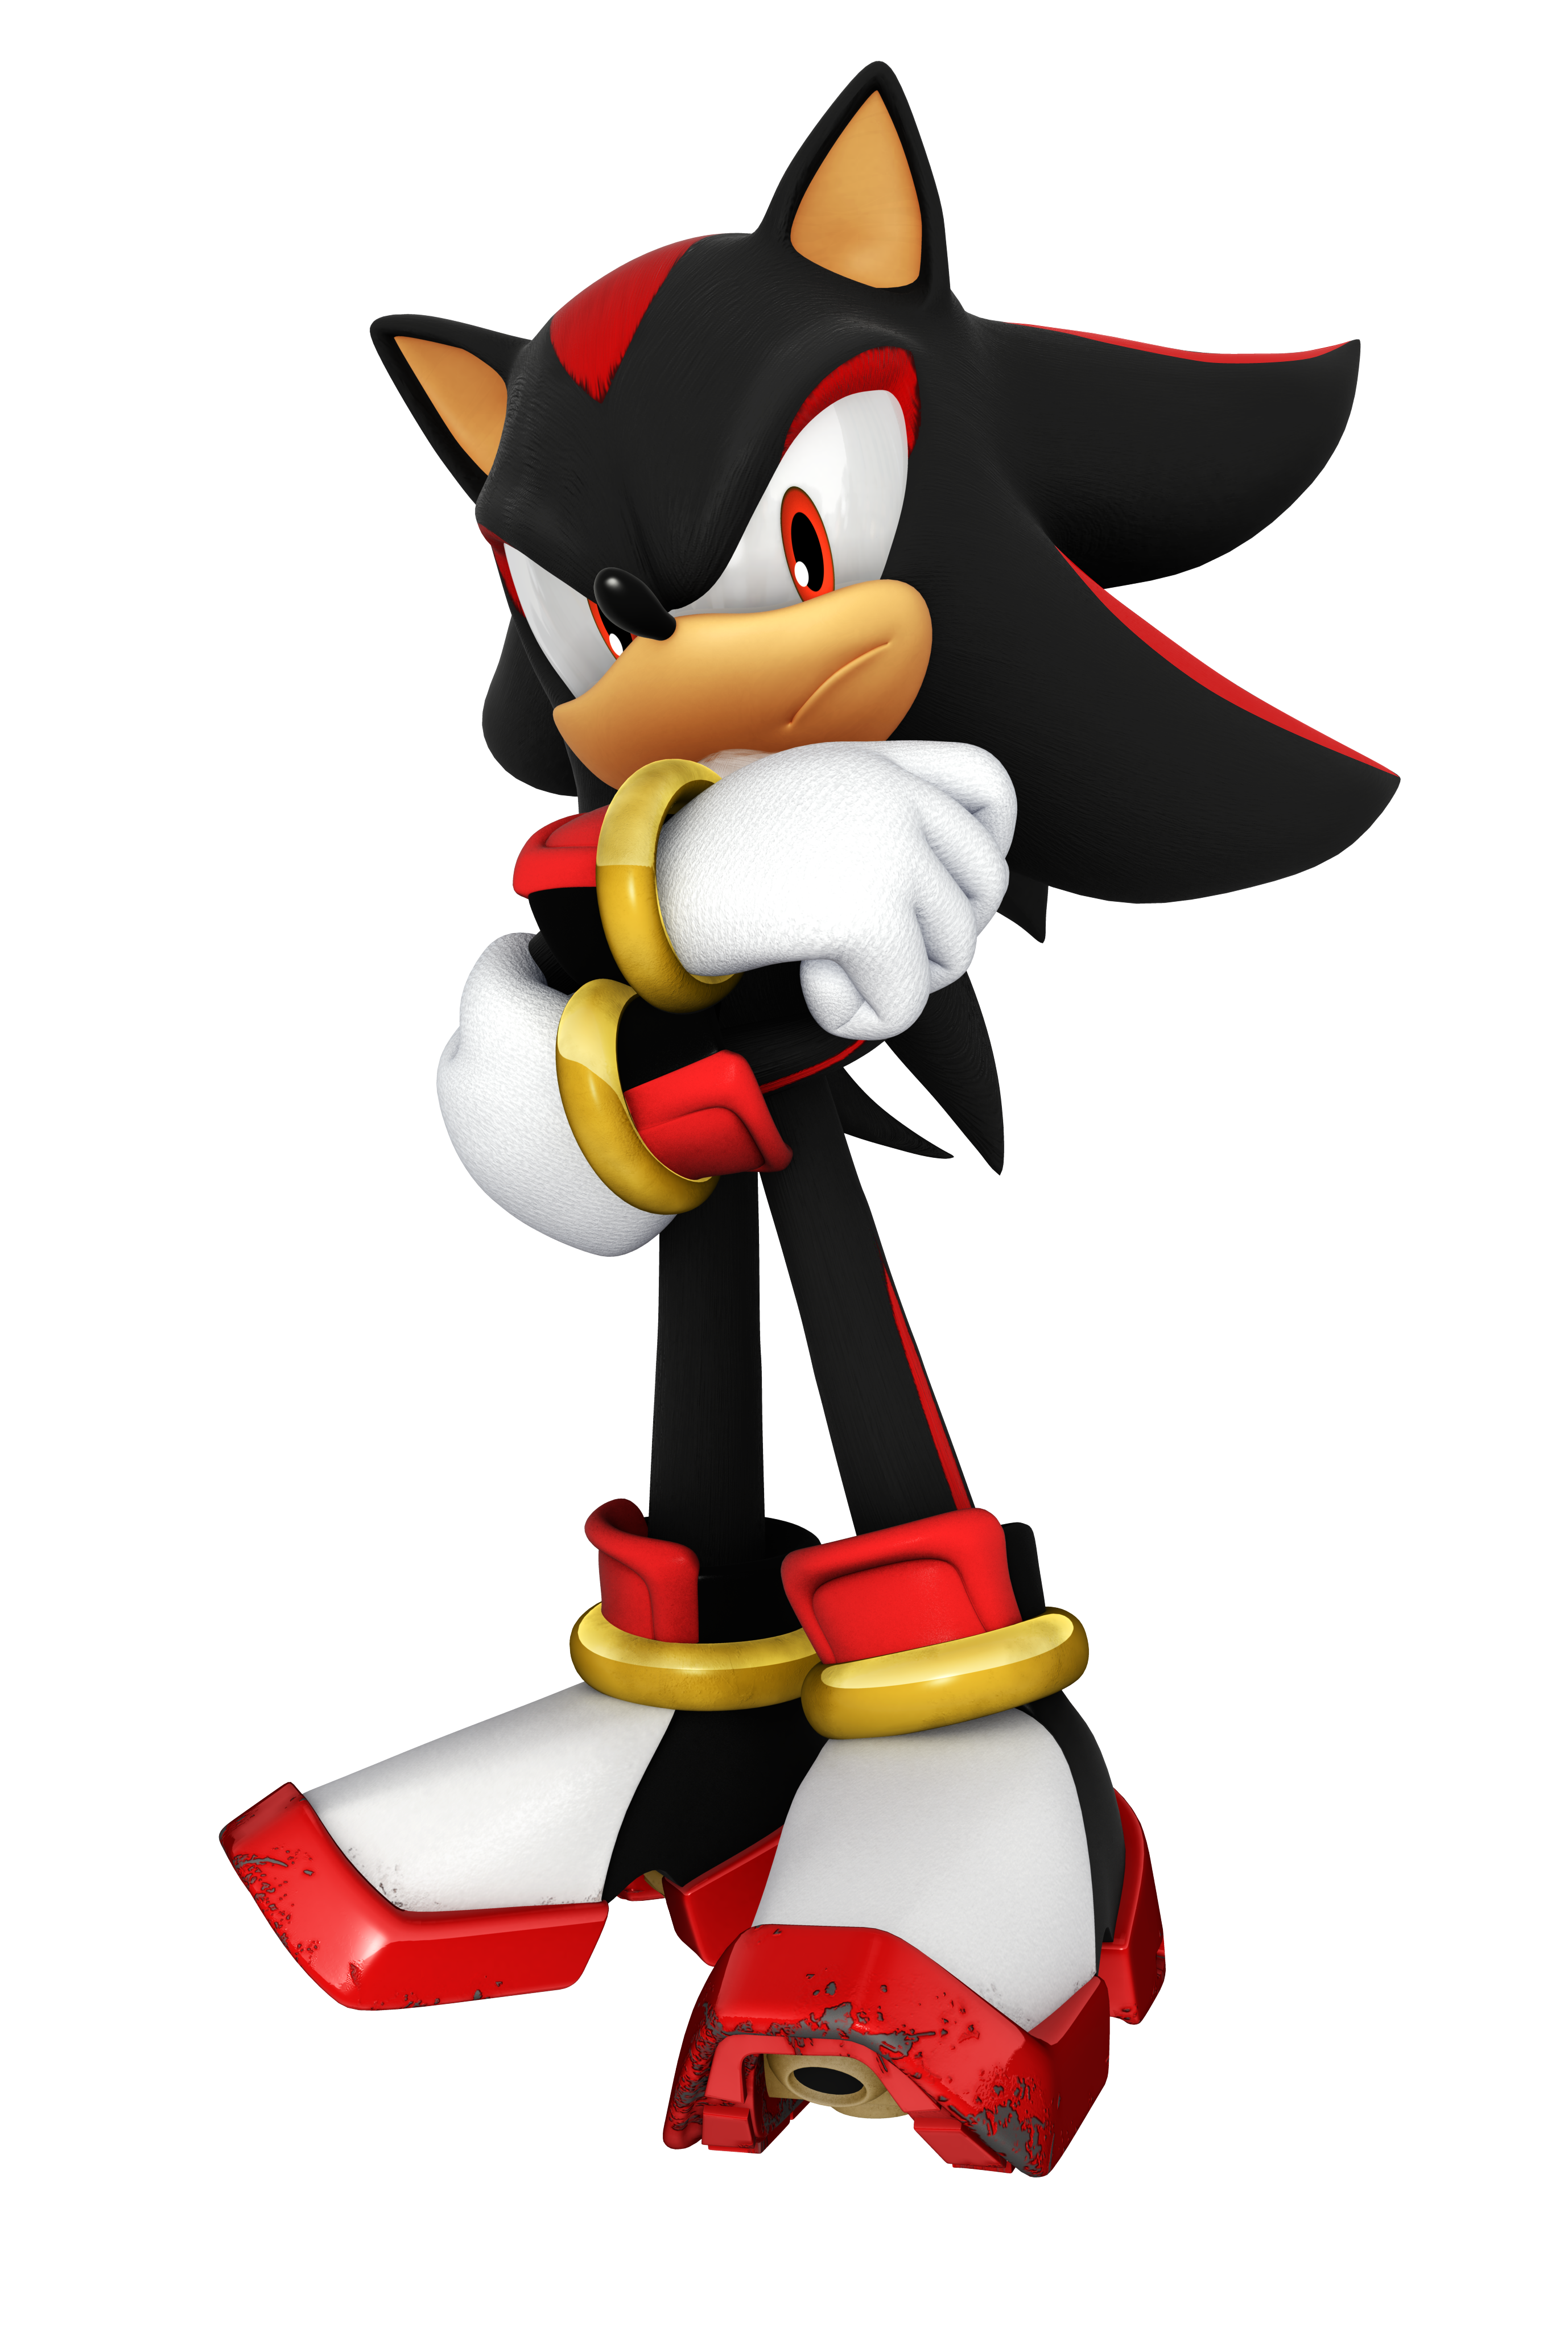 Sonic Menu, blaze The Cat, Rouge the Bat, metal Sonic, sonic Drivein, sonic  Boom, sonic X, Knuckles the Echidna, Tails, shadow The Hedgehog